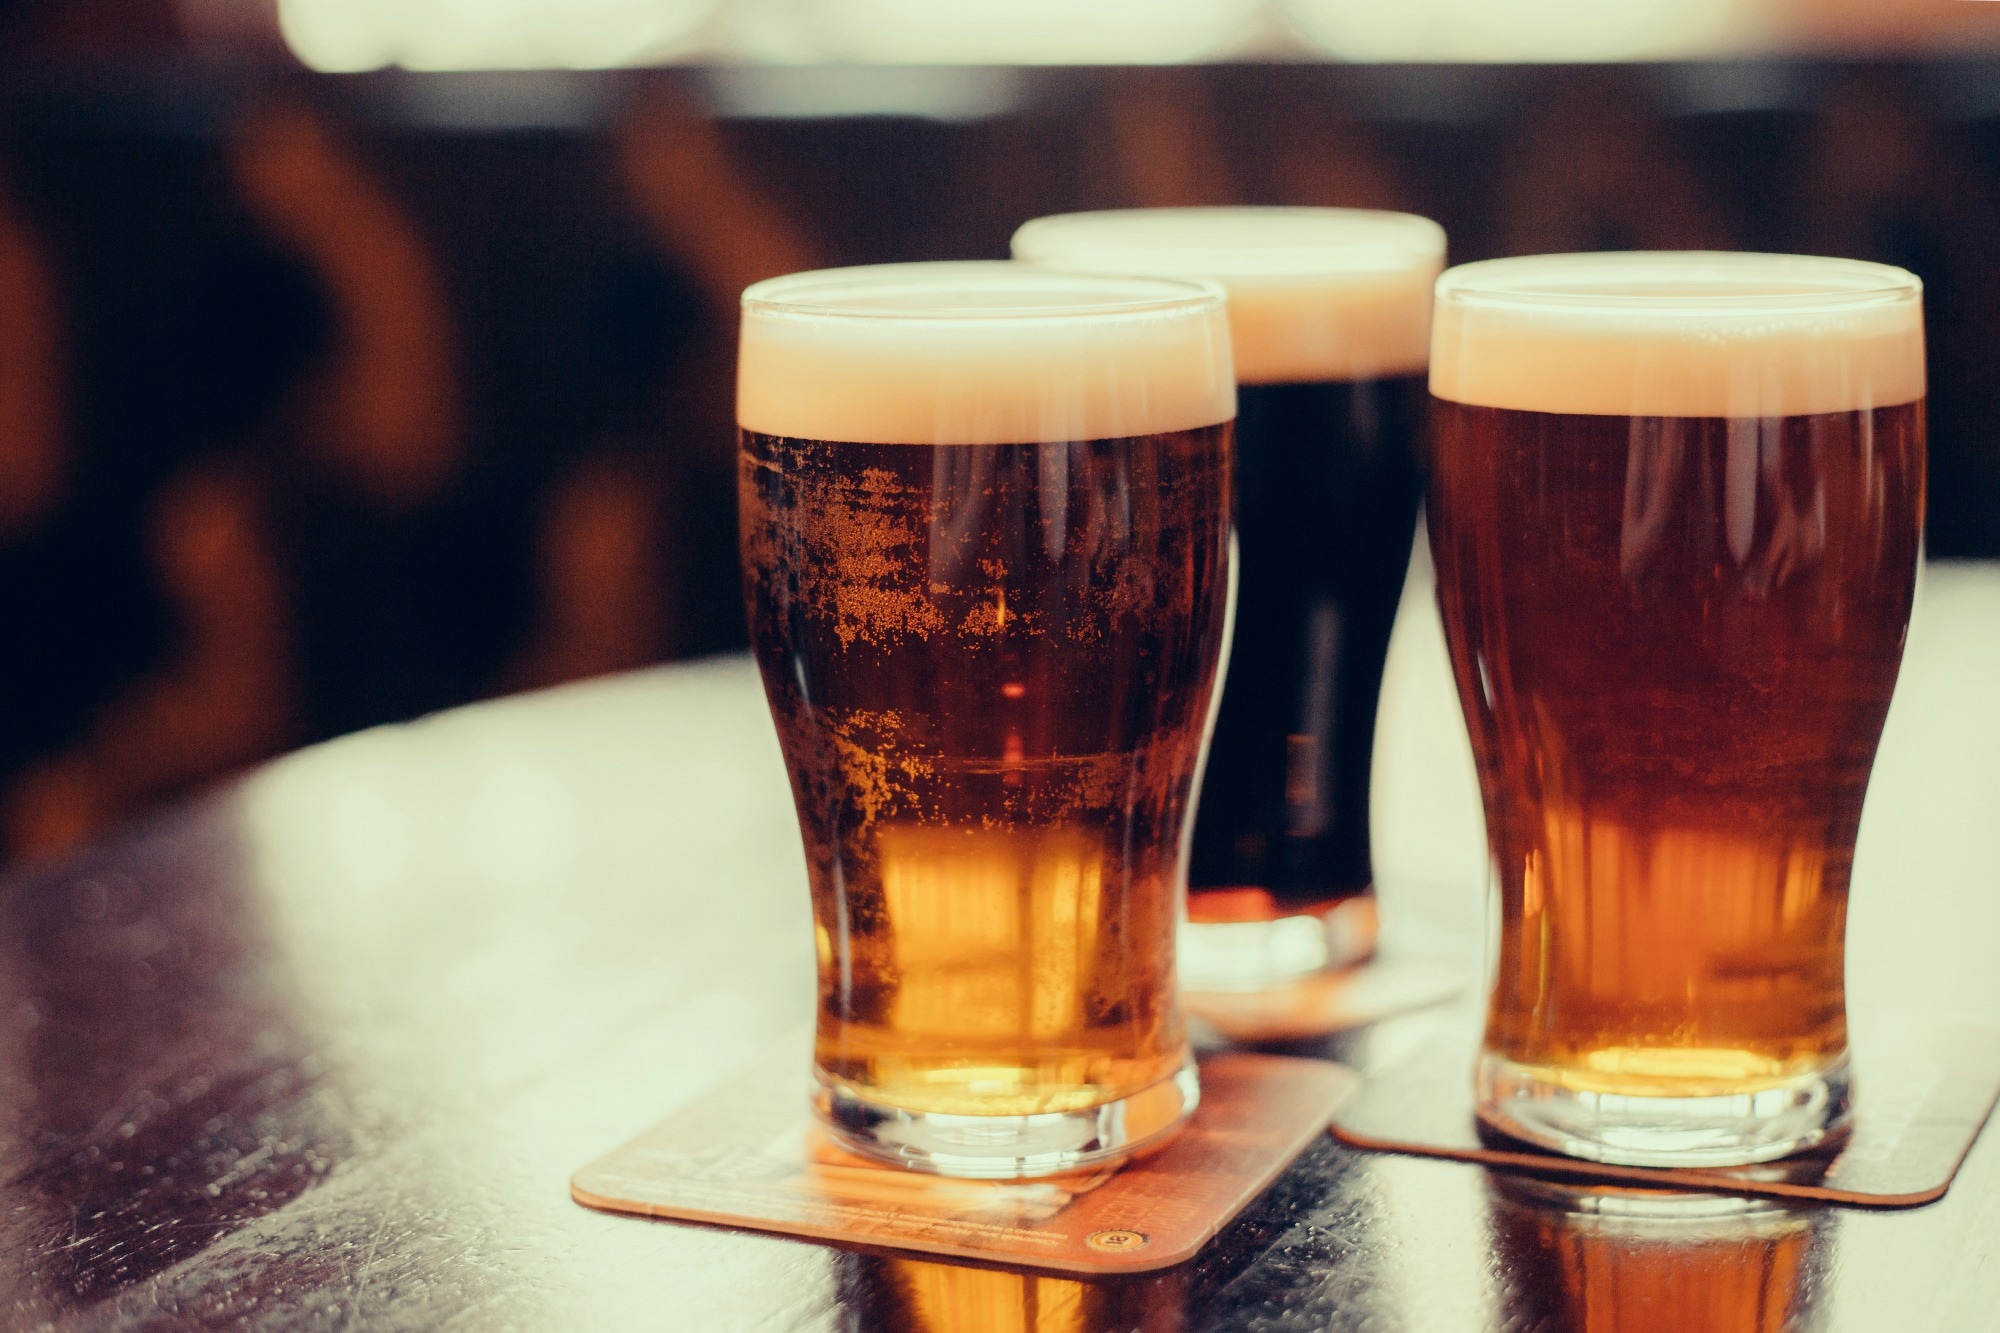 Study: Effects of Antioxidants in Fermented Beverages in Tissue Transcriptomics: Effect of Beer Intake on Myocardial Tissue after Oxidative Injury. Image Credit: Viiviien/Shutterstock.com